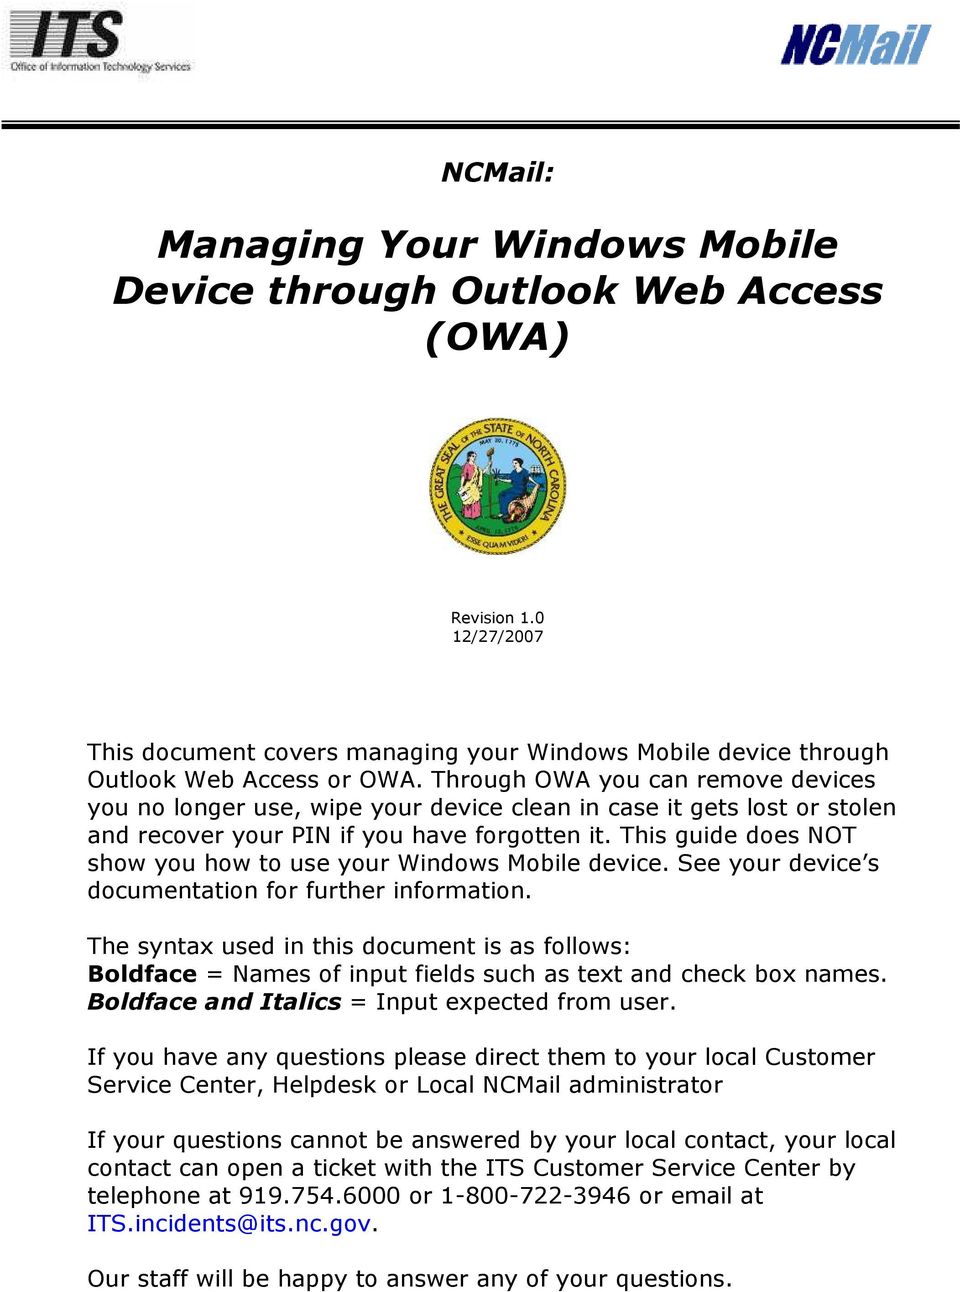 This guide does NOT show you how to use your Windows Mobile device. See your device s documentation for further information.